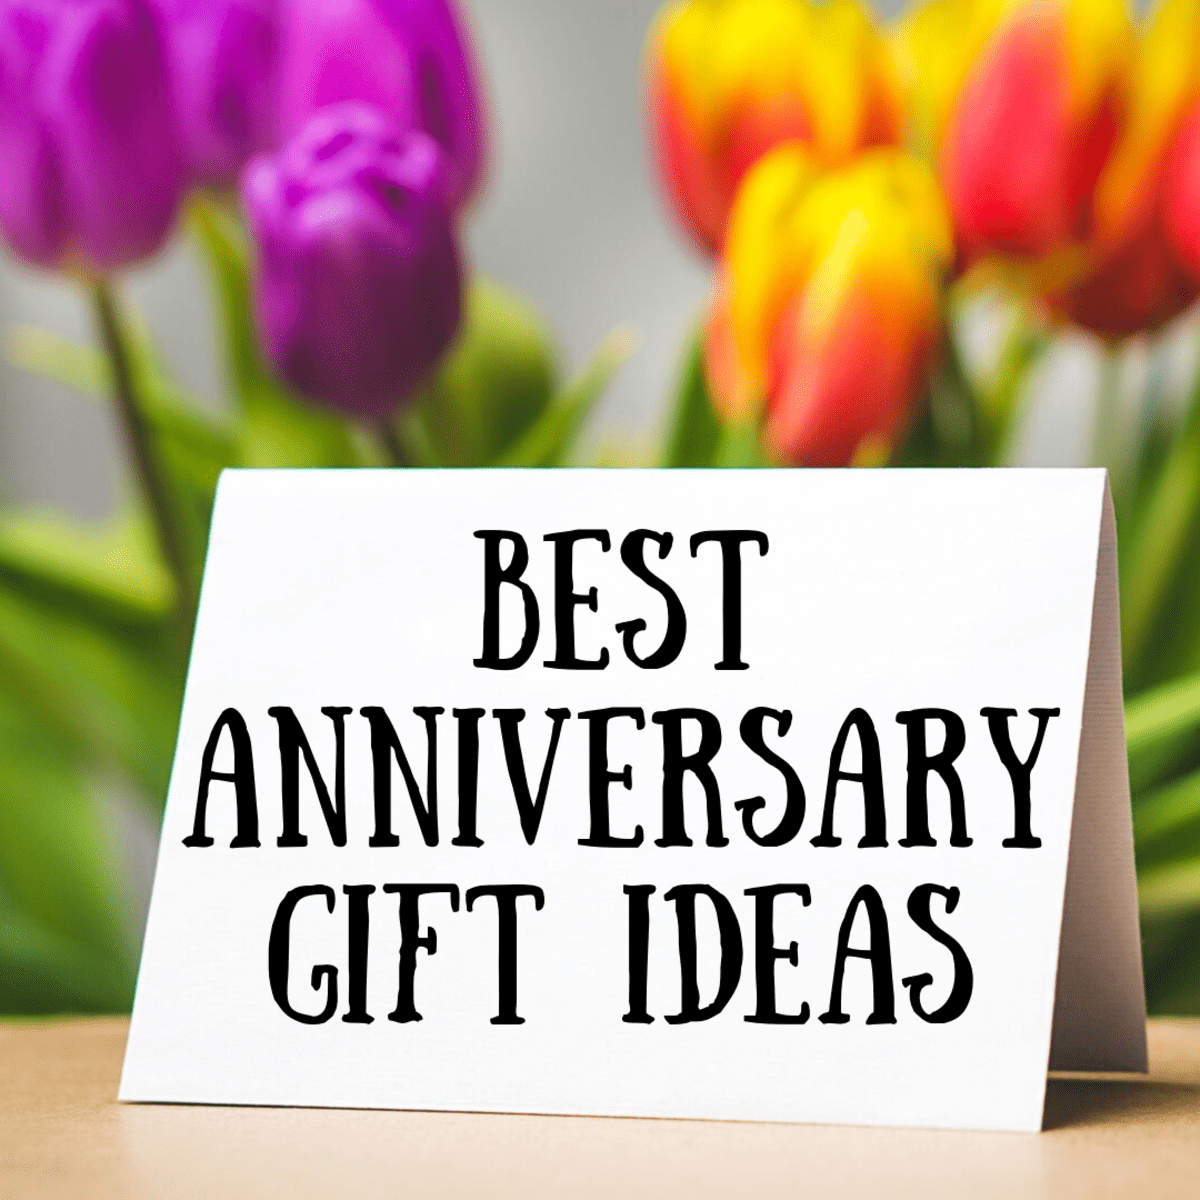 The Best 1-Year Anniversary Gift Ideas - 2023 Edition